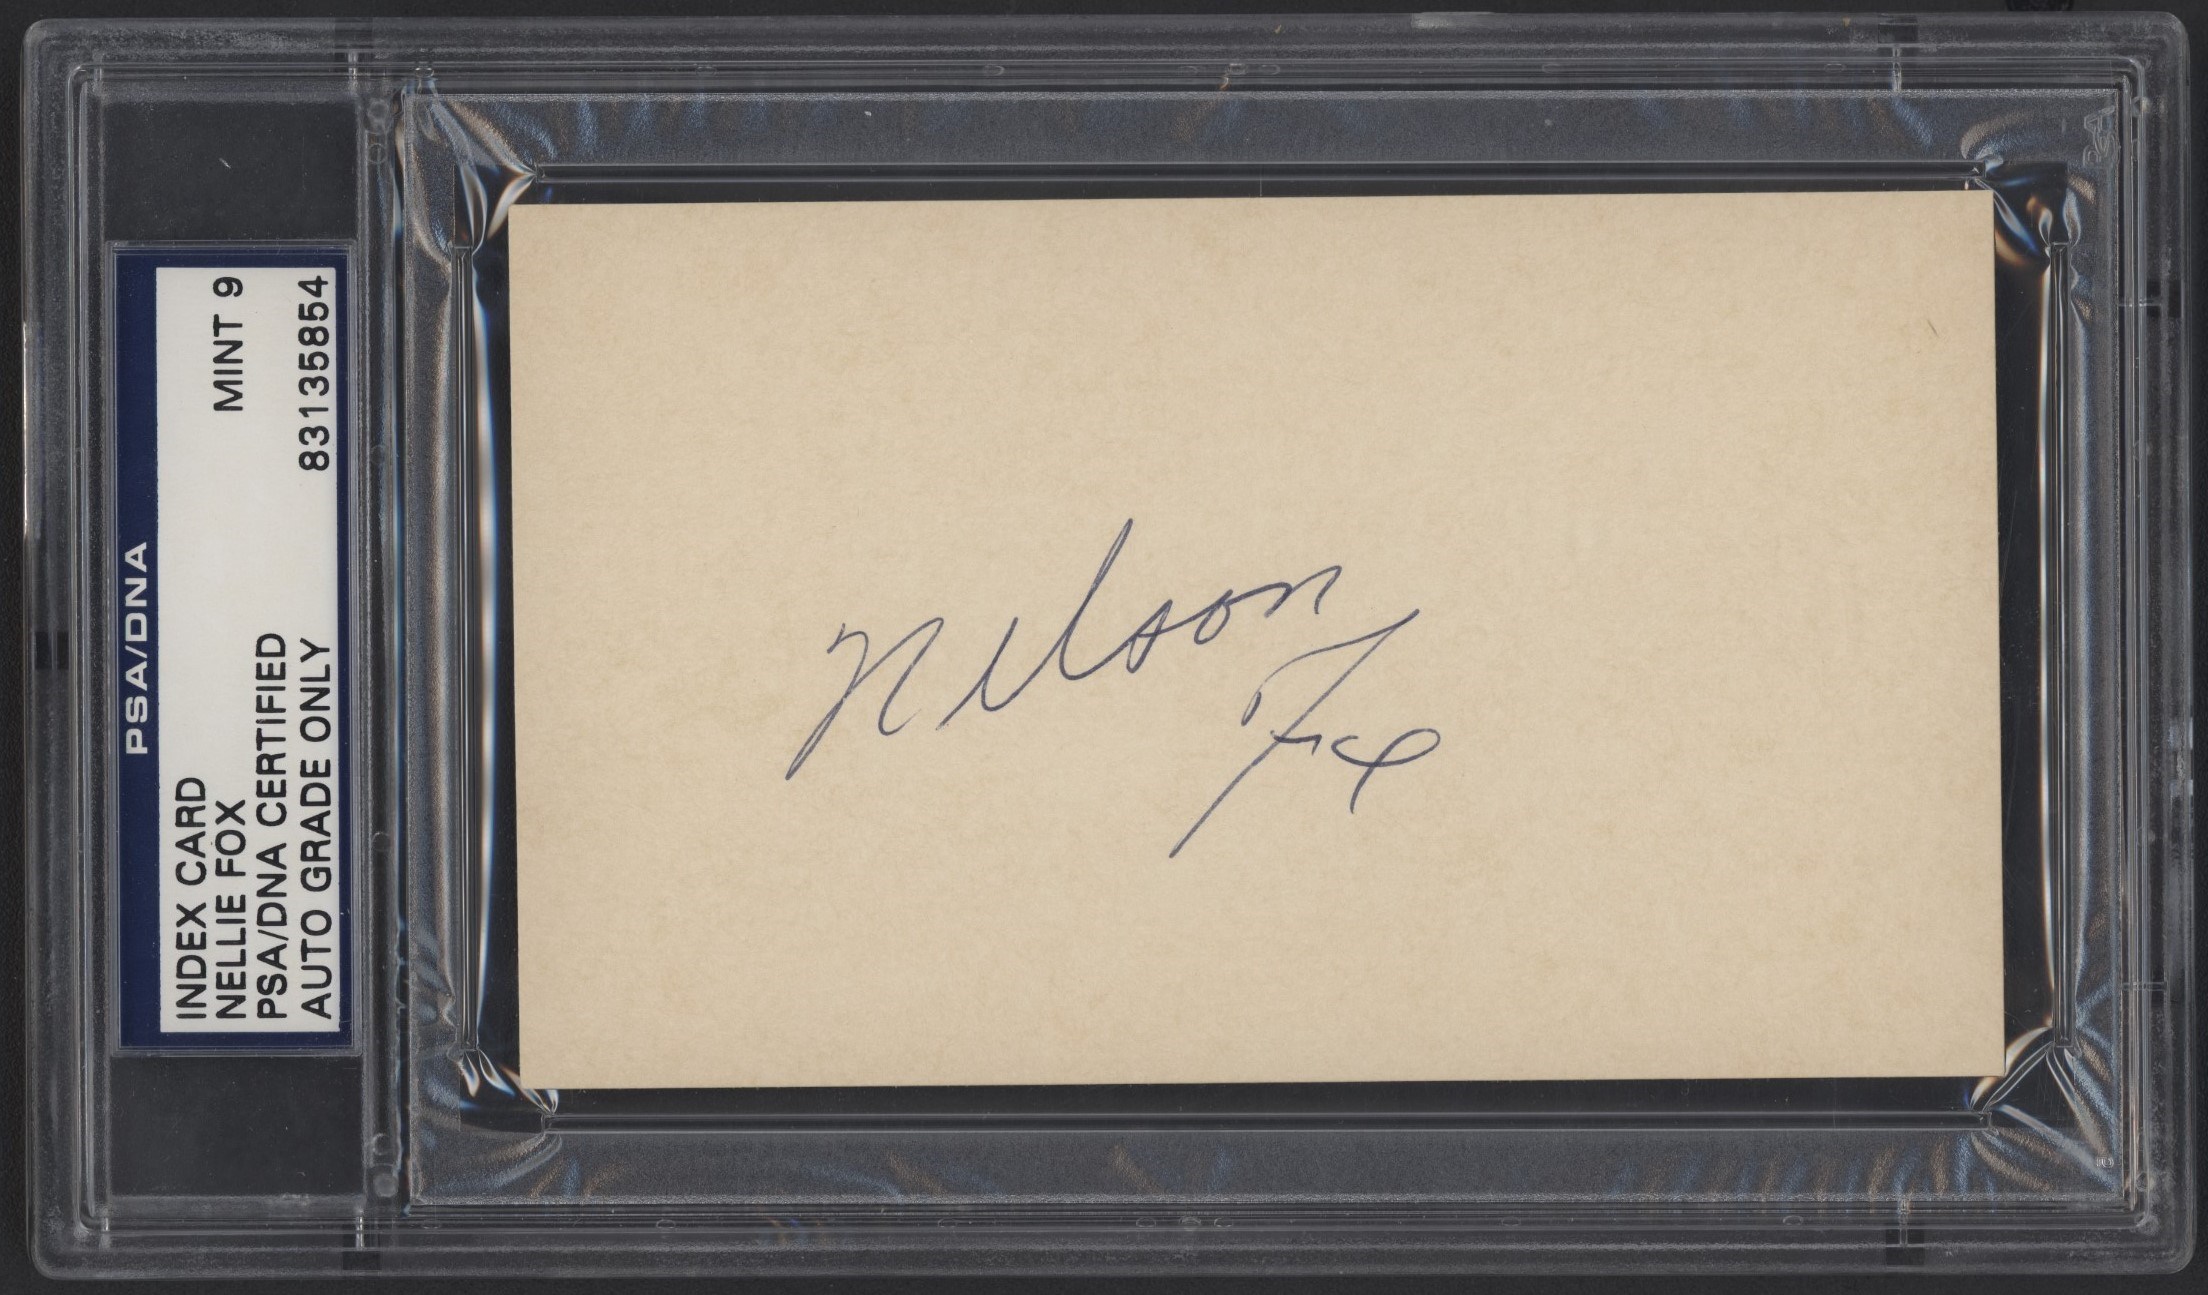 Nellie Fox Signed Index Card (PSA Graded MINT 9)